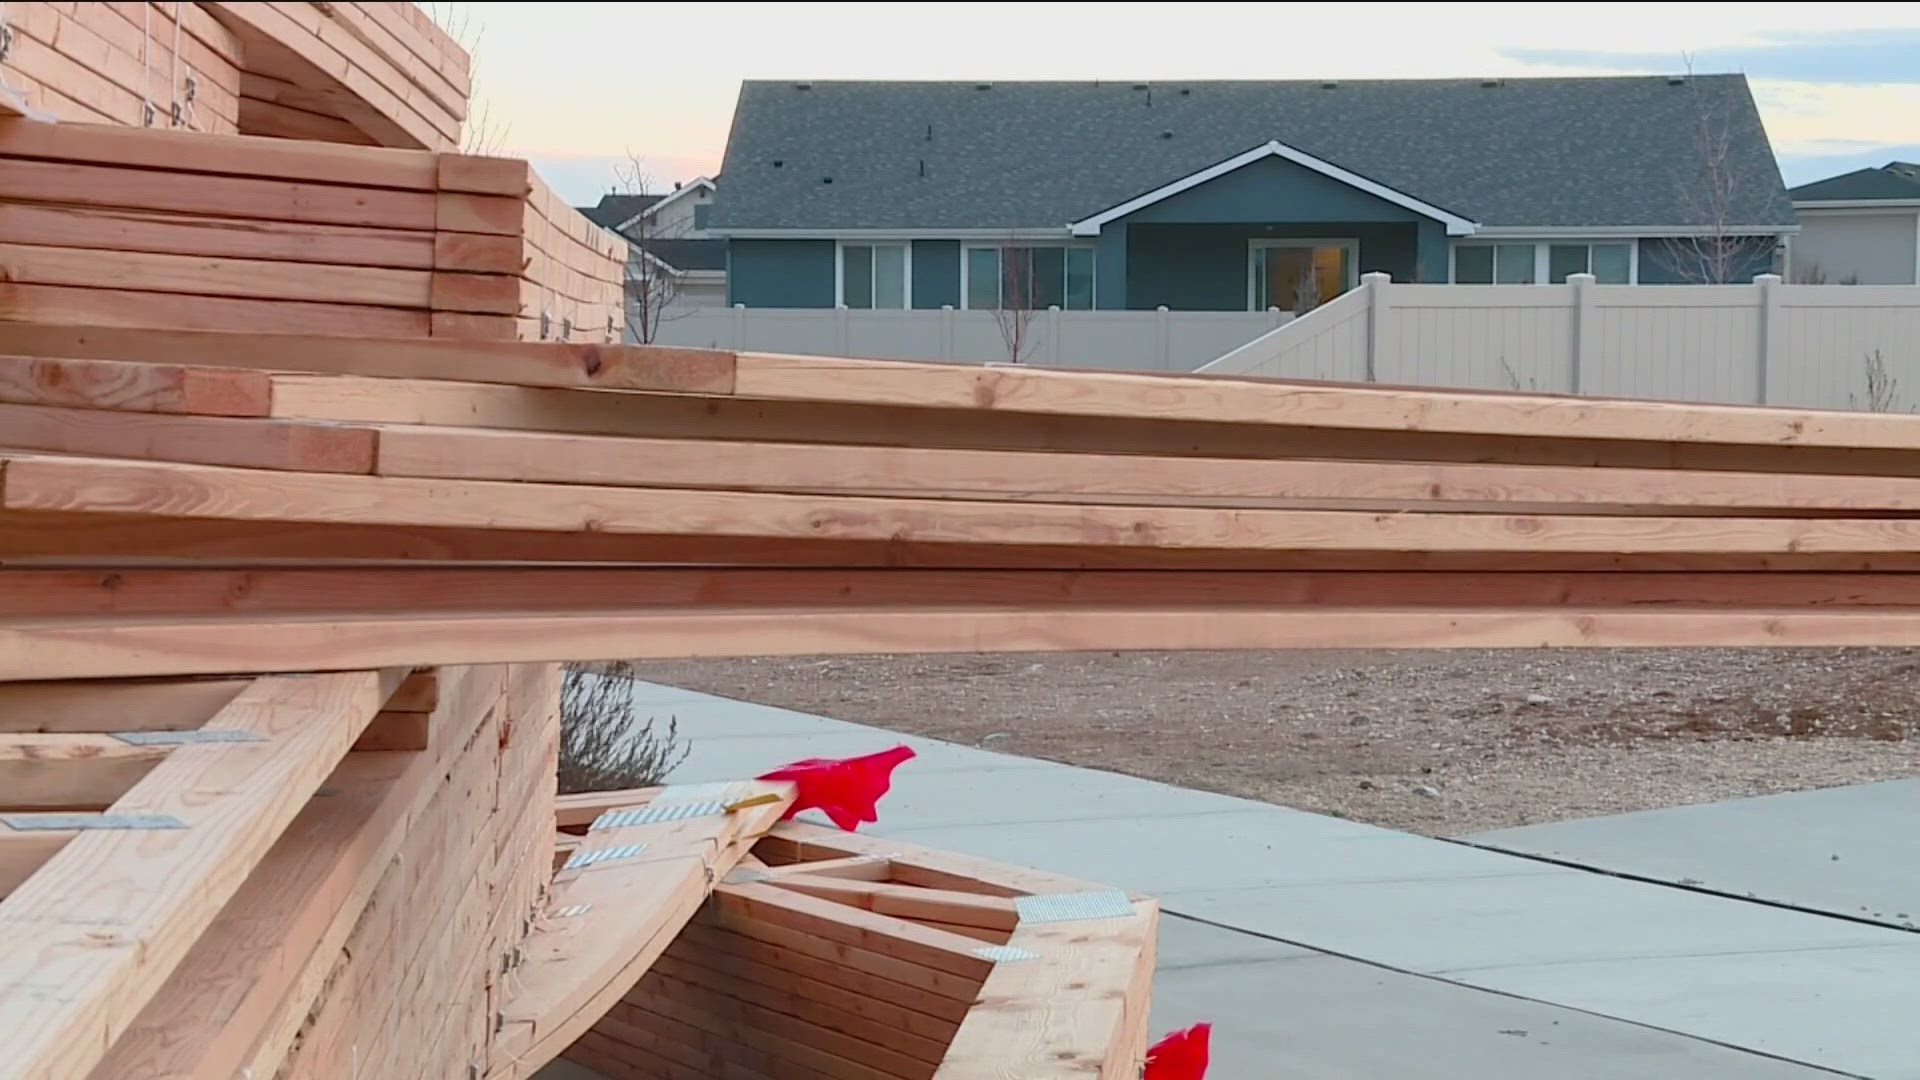 The city of Boise, like many communities, is working to help provide more affordable housing.